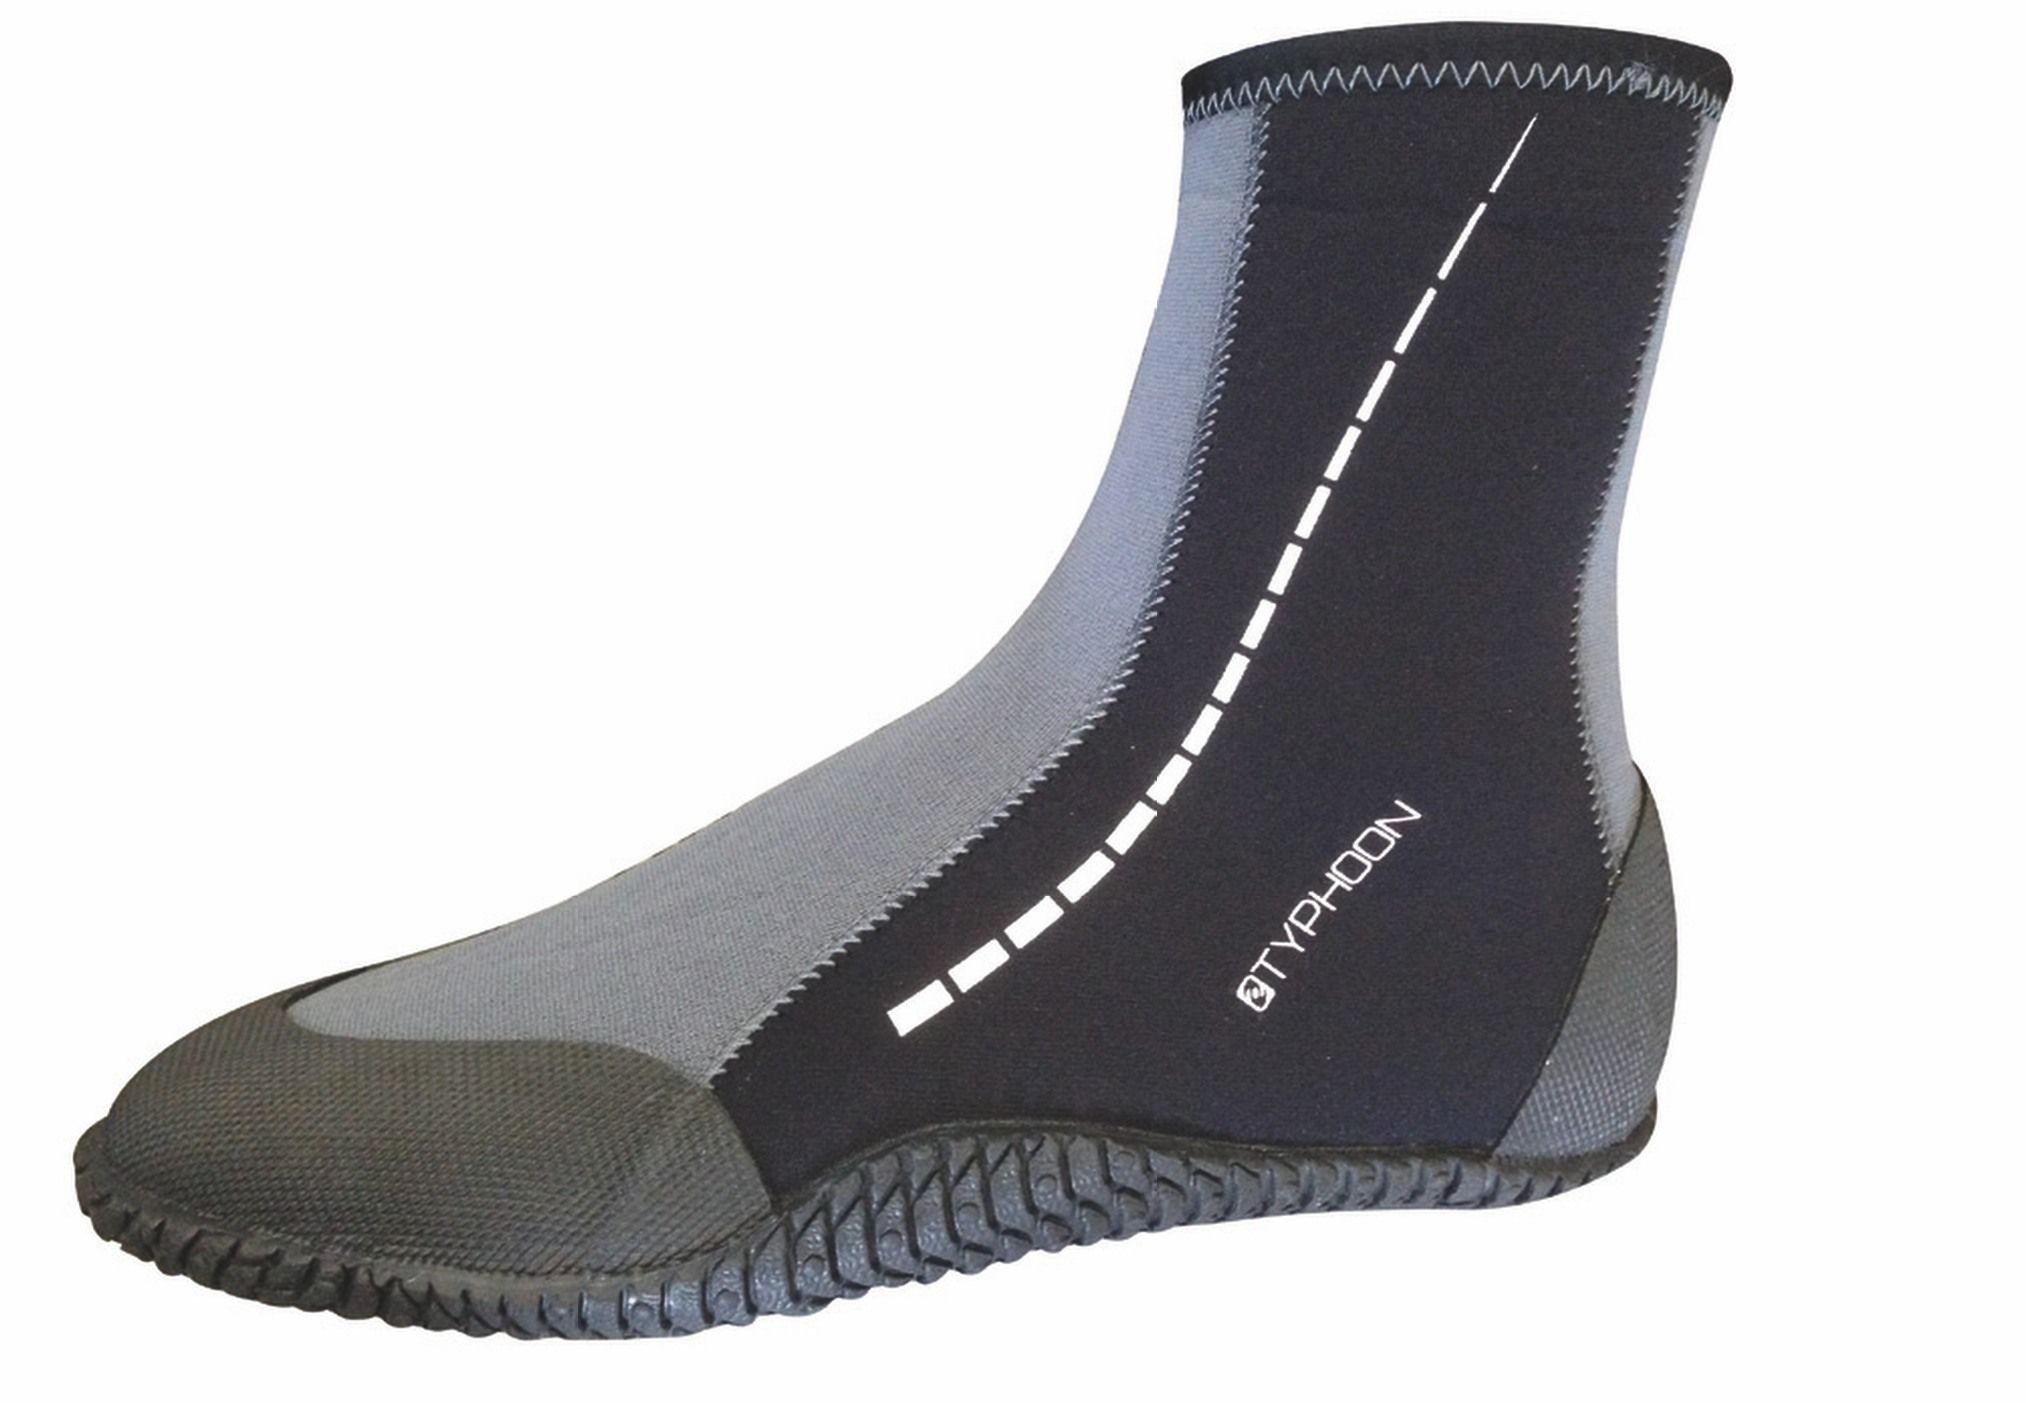 Z3 Boot Children's | Product